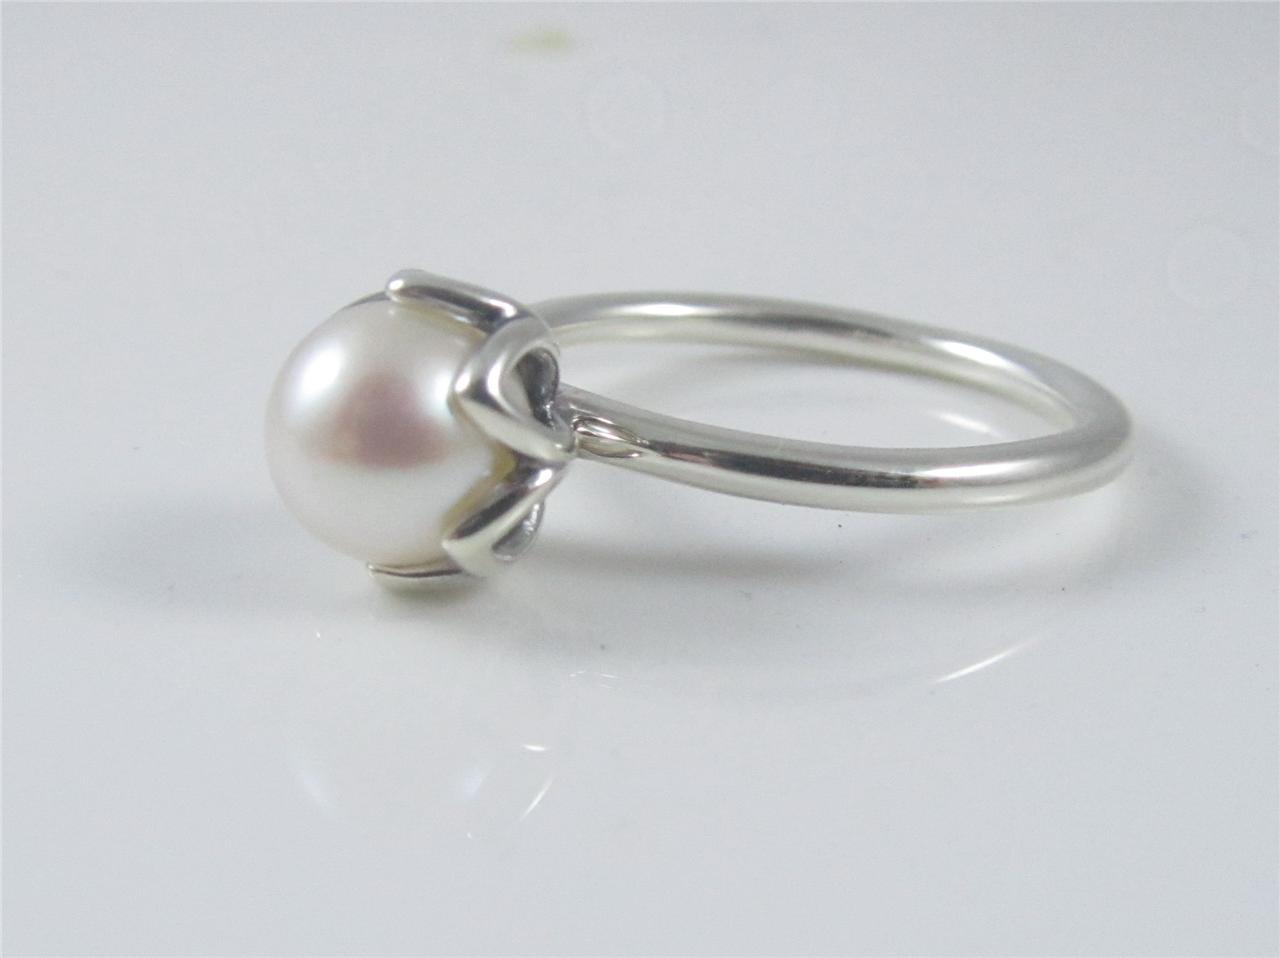 Authentic Genuine Pandora Sterling Silver White Pearl Ring 190865P54